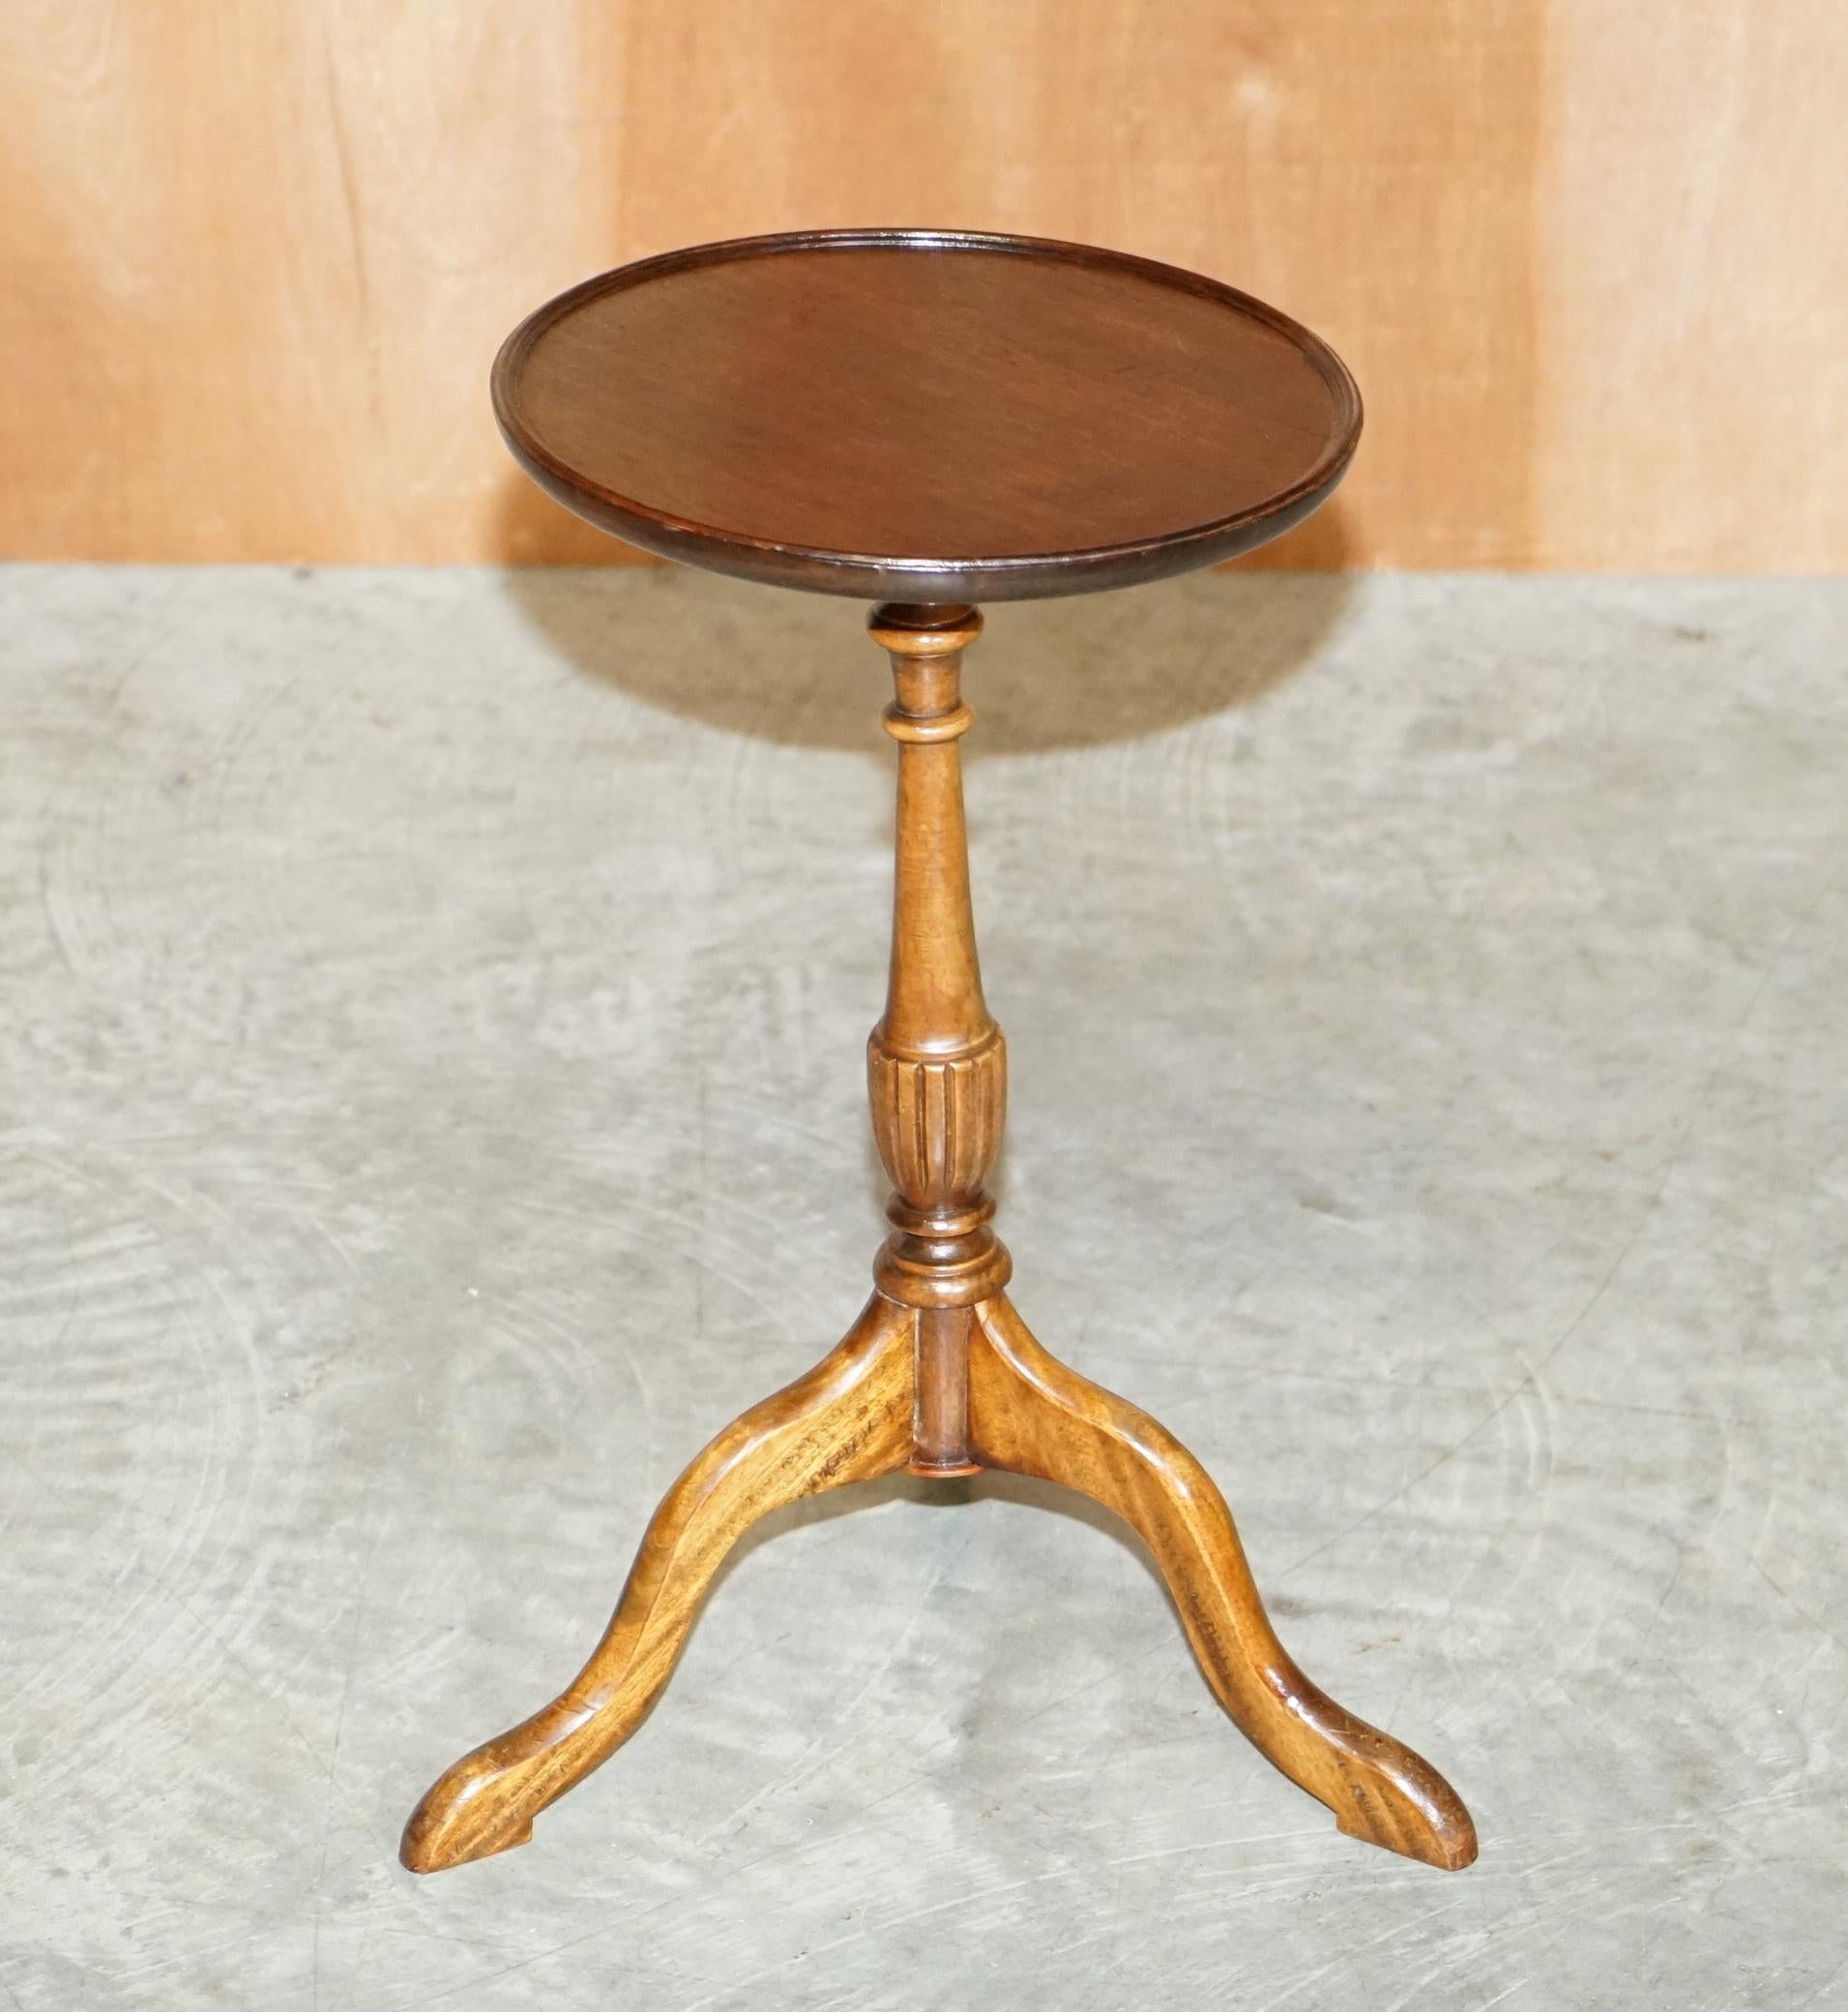 We are delighted to offer for sale this lovely vintage two tone mahogany tripod table

A very good looking well made and decorative piece, it sits well in any setting and is very unitarian. The base is a light mahogany the top slightly darker